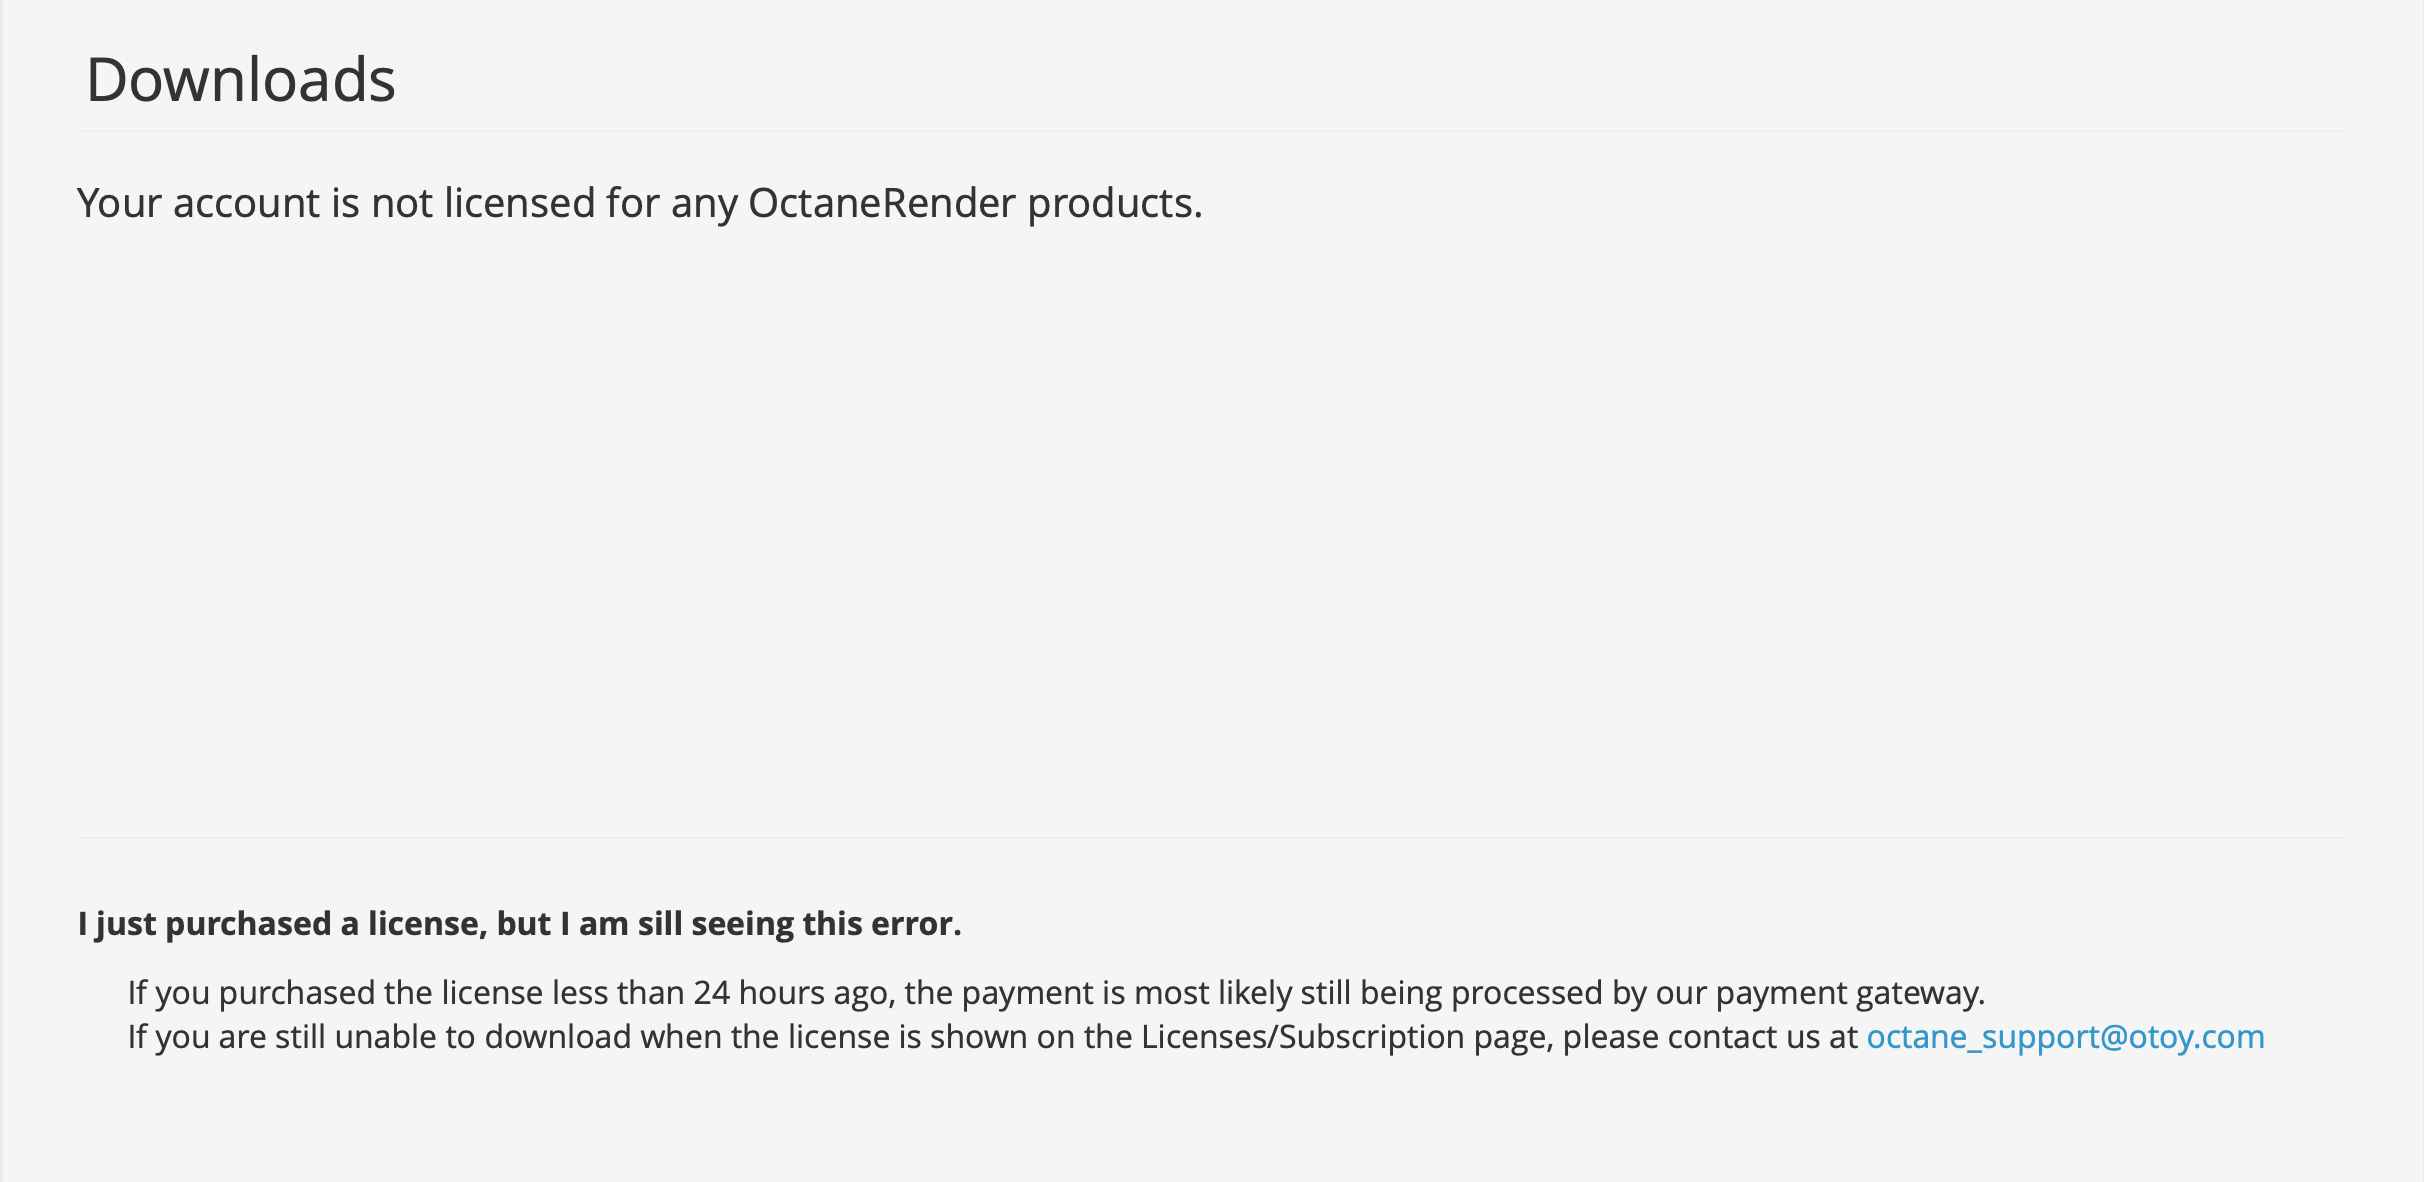 Your account is not licensed for any OctaneRender products